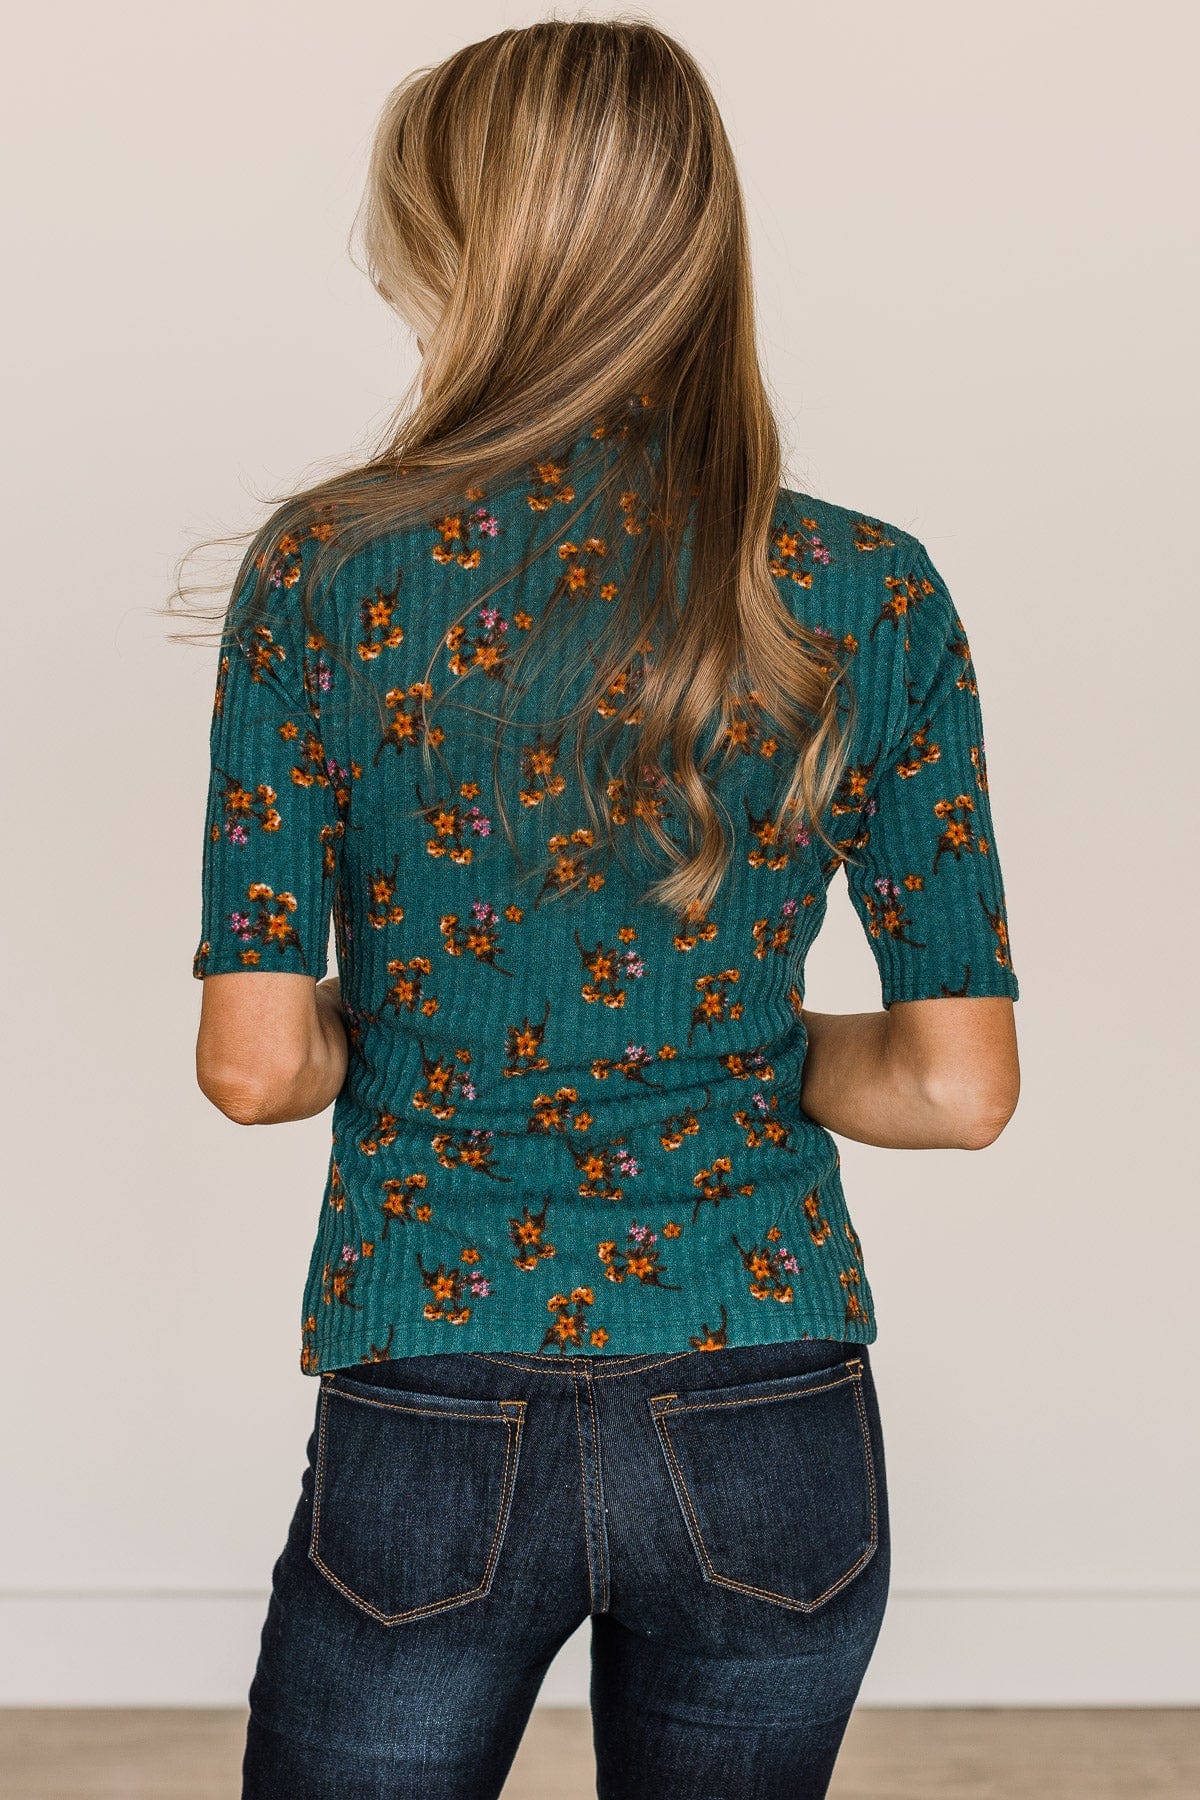 In Full Bloom Floral Knit Top- Teal